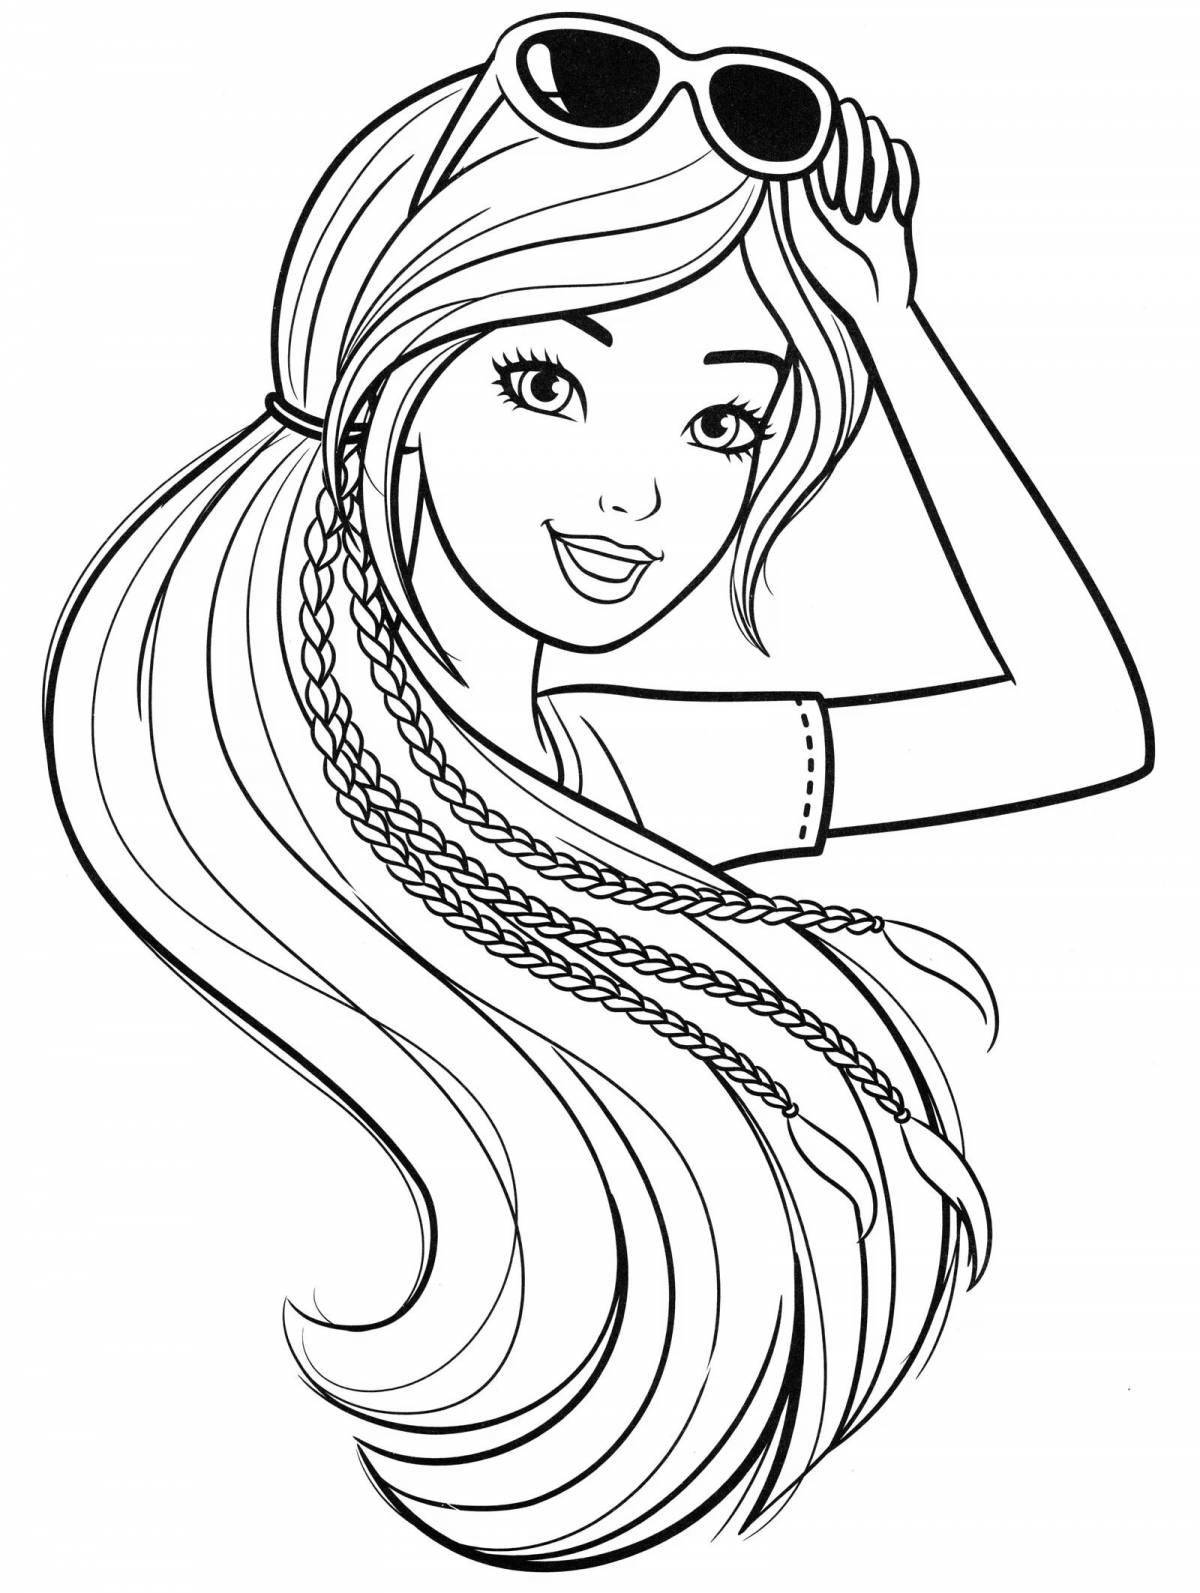 Divine coloring for girls 9-10 years old